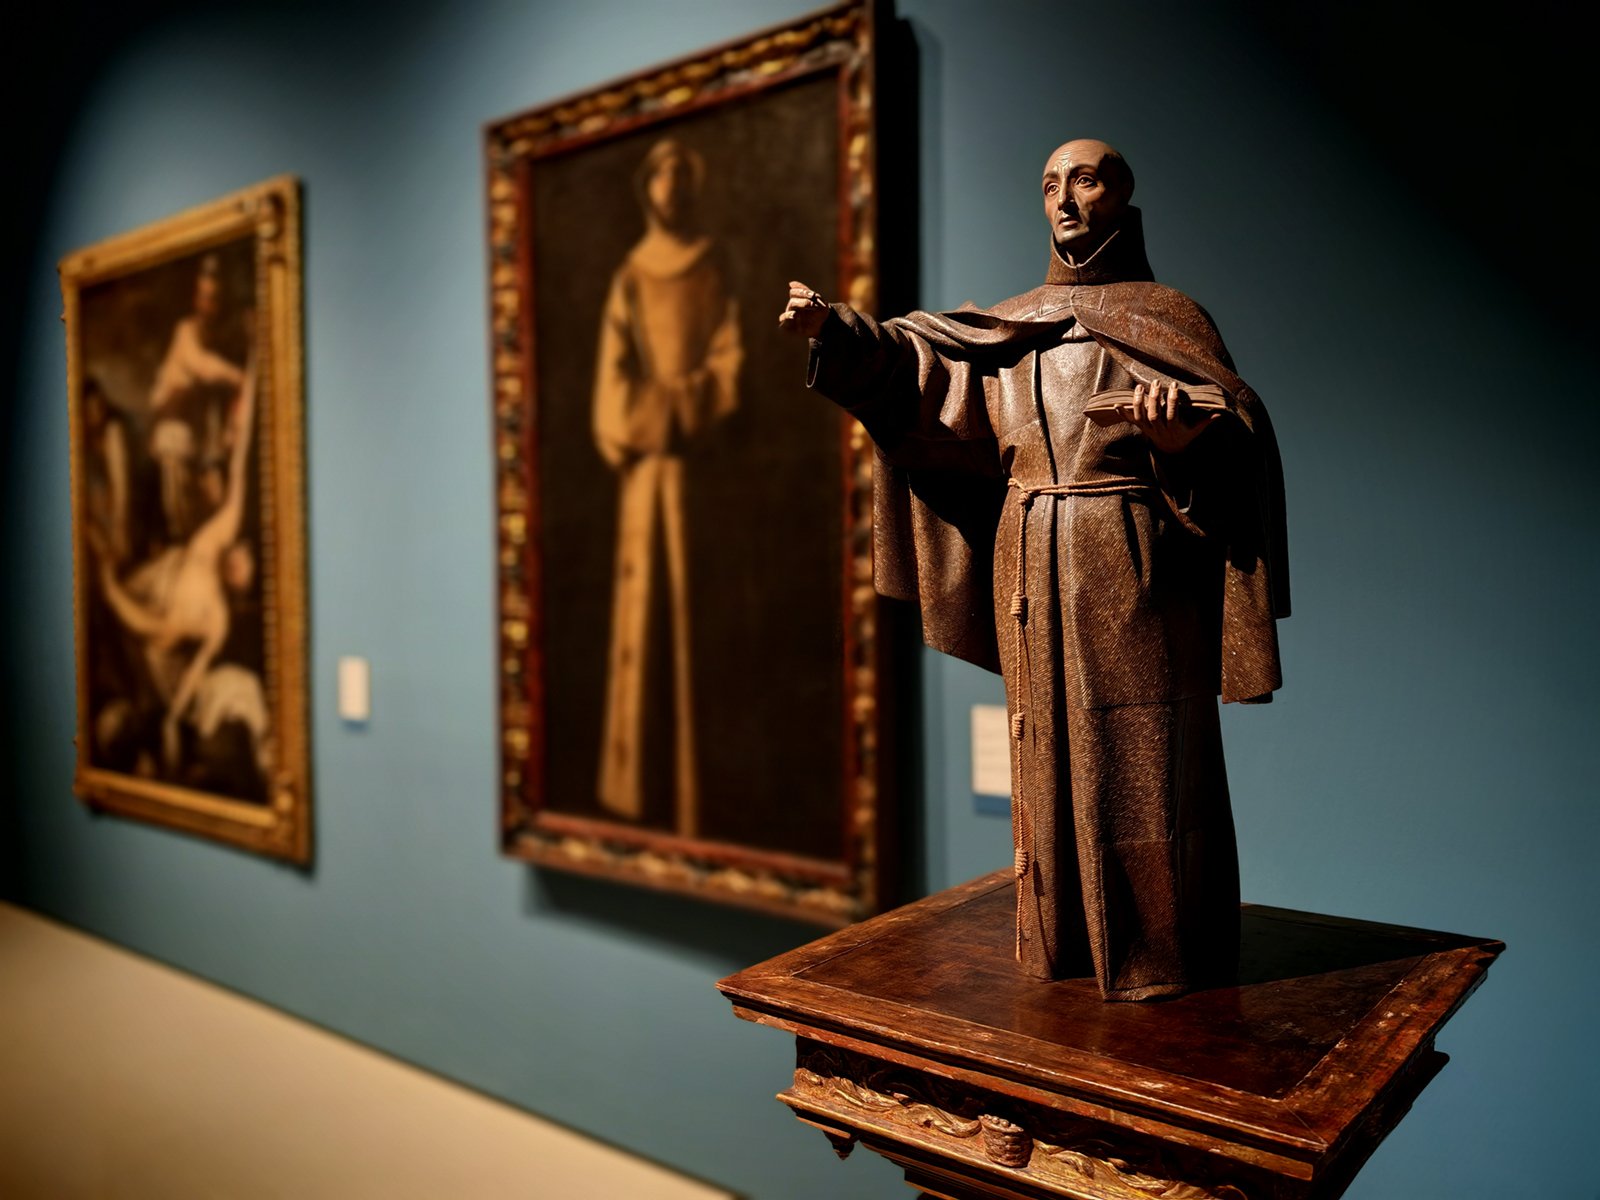 A wooden sculpture of a robed historical figure gesturing with one hand, displayed in a museum with paintings in the background. the lighting highlights the sculpture's detailed craftsmanship.